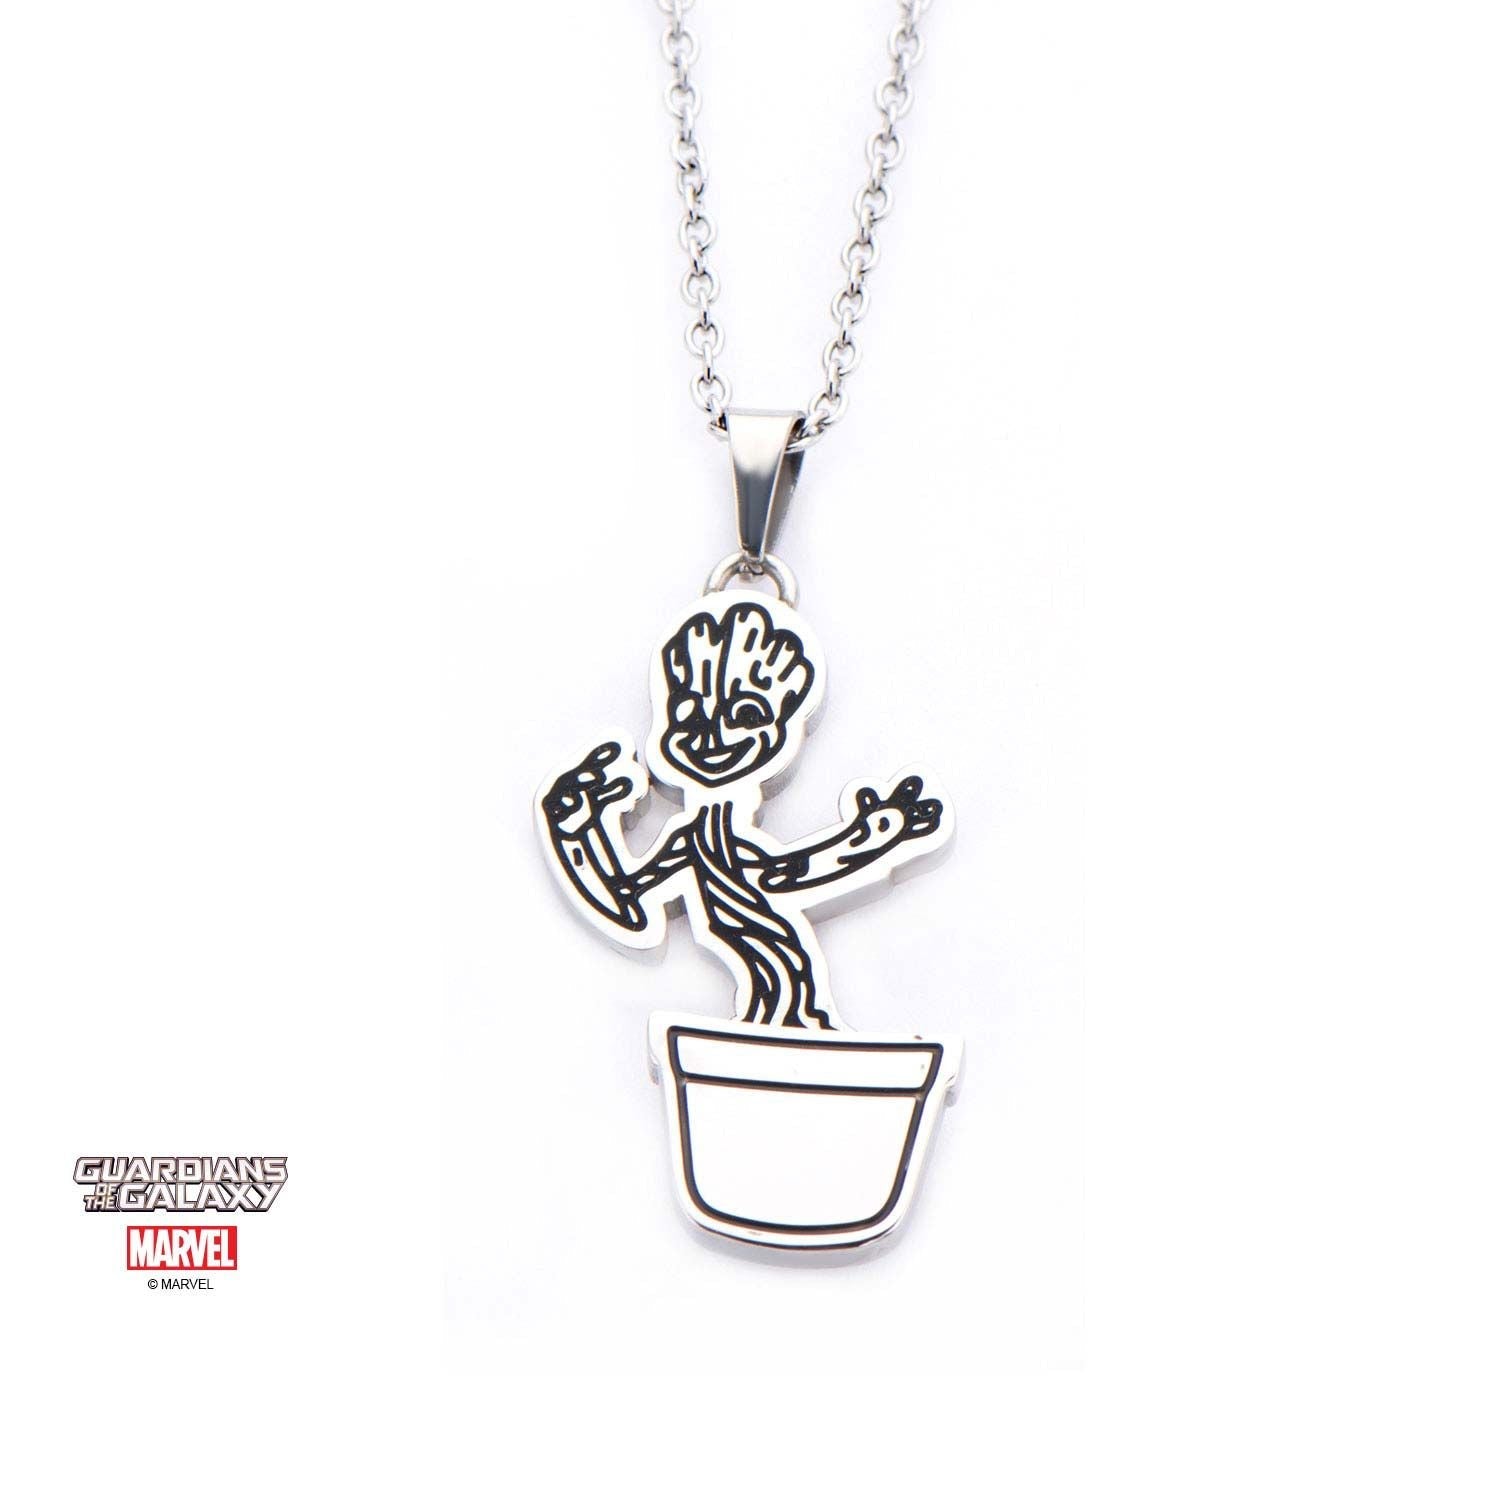 MARVEL Marvel Guardians of the Galaxy Groot Pendant Necklace B -Rebel Bod-RebelBod